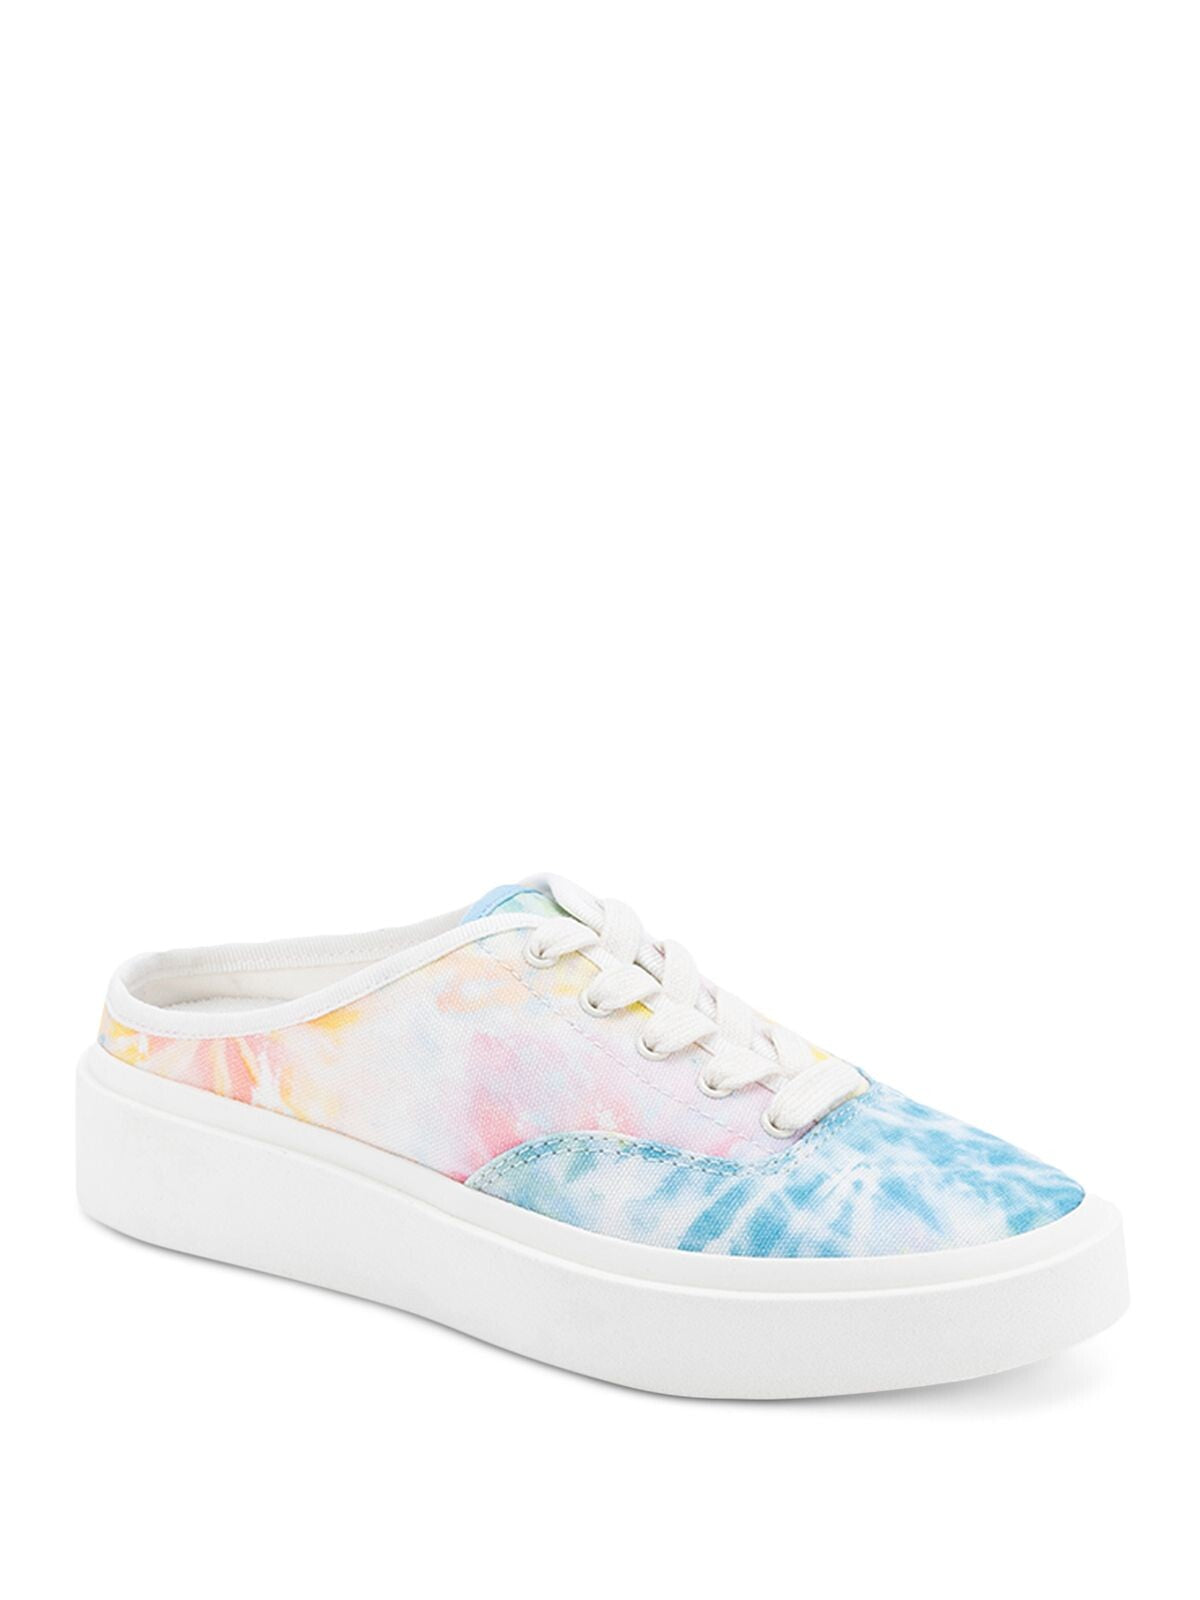 DOLCE VITA Womens White Tie Dye Lace Removable Insole Cushioned Vanie Round Toe Platform Slip On Sneakers Shoes 9.5